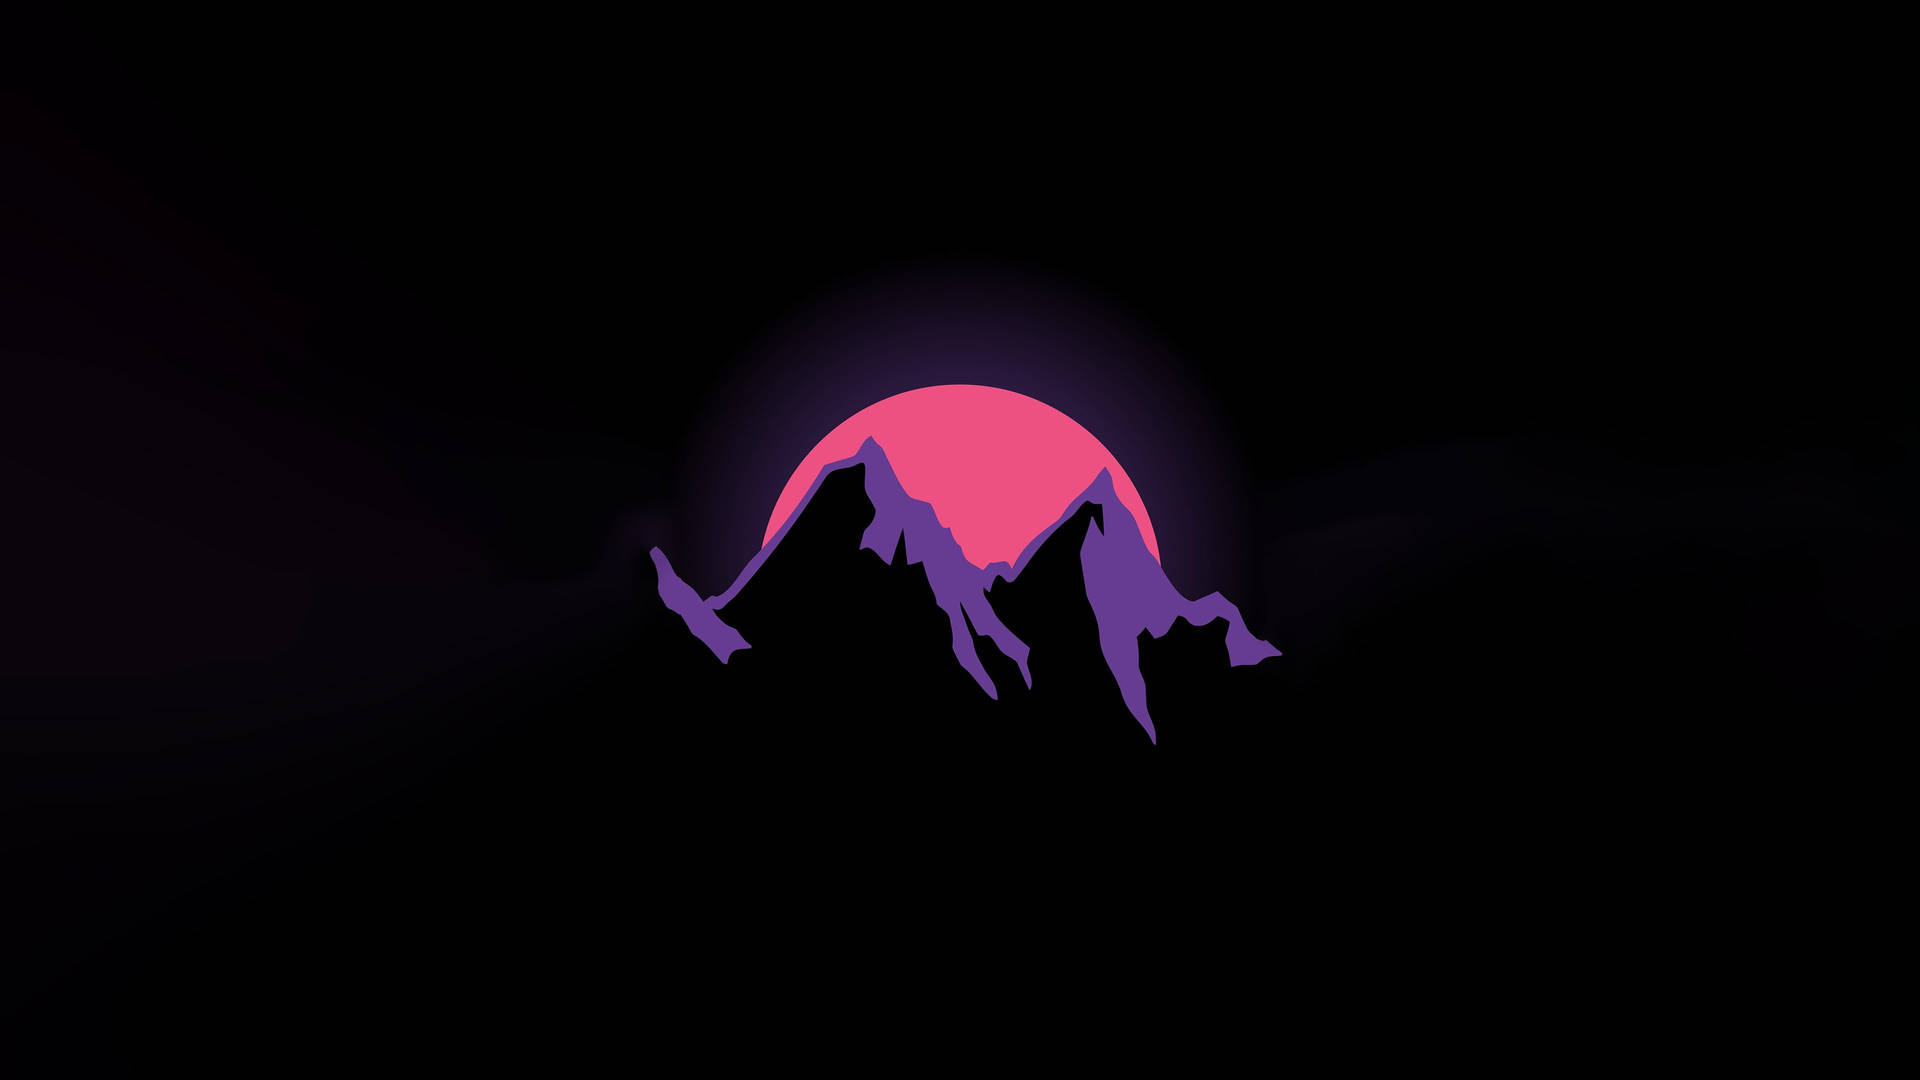 Dark Abstract Of Mountain Silhouette Wallpaper